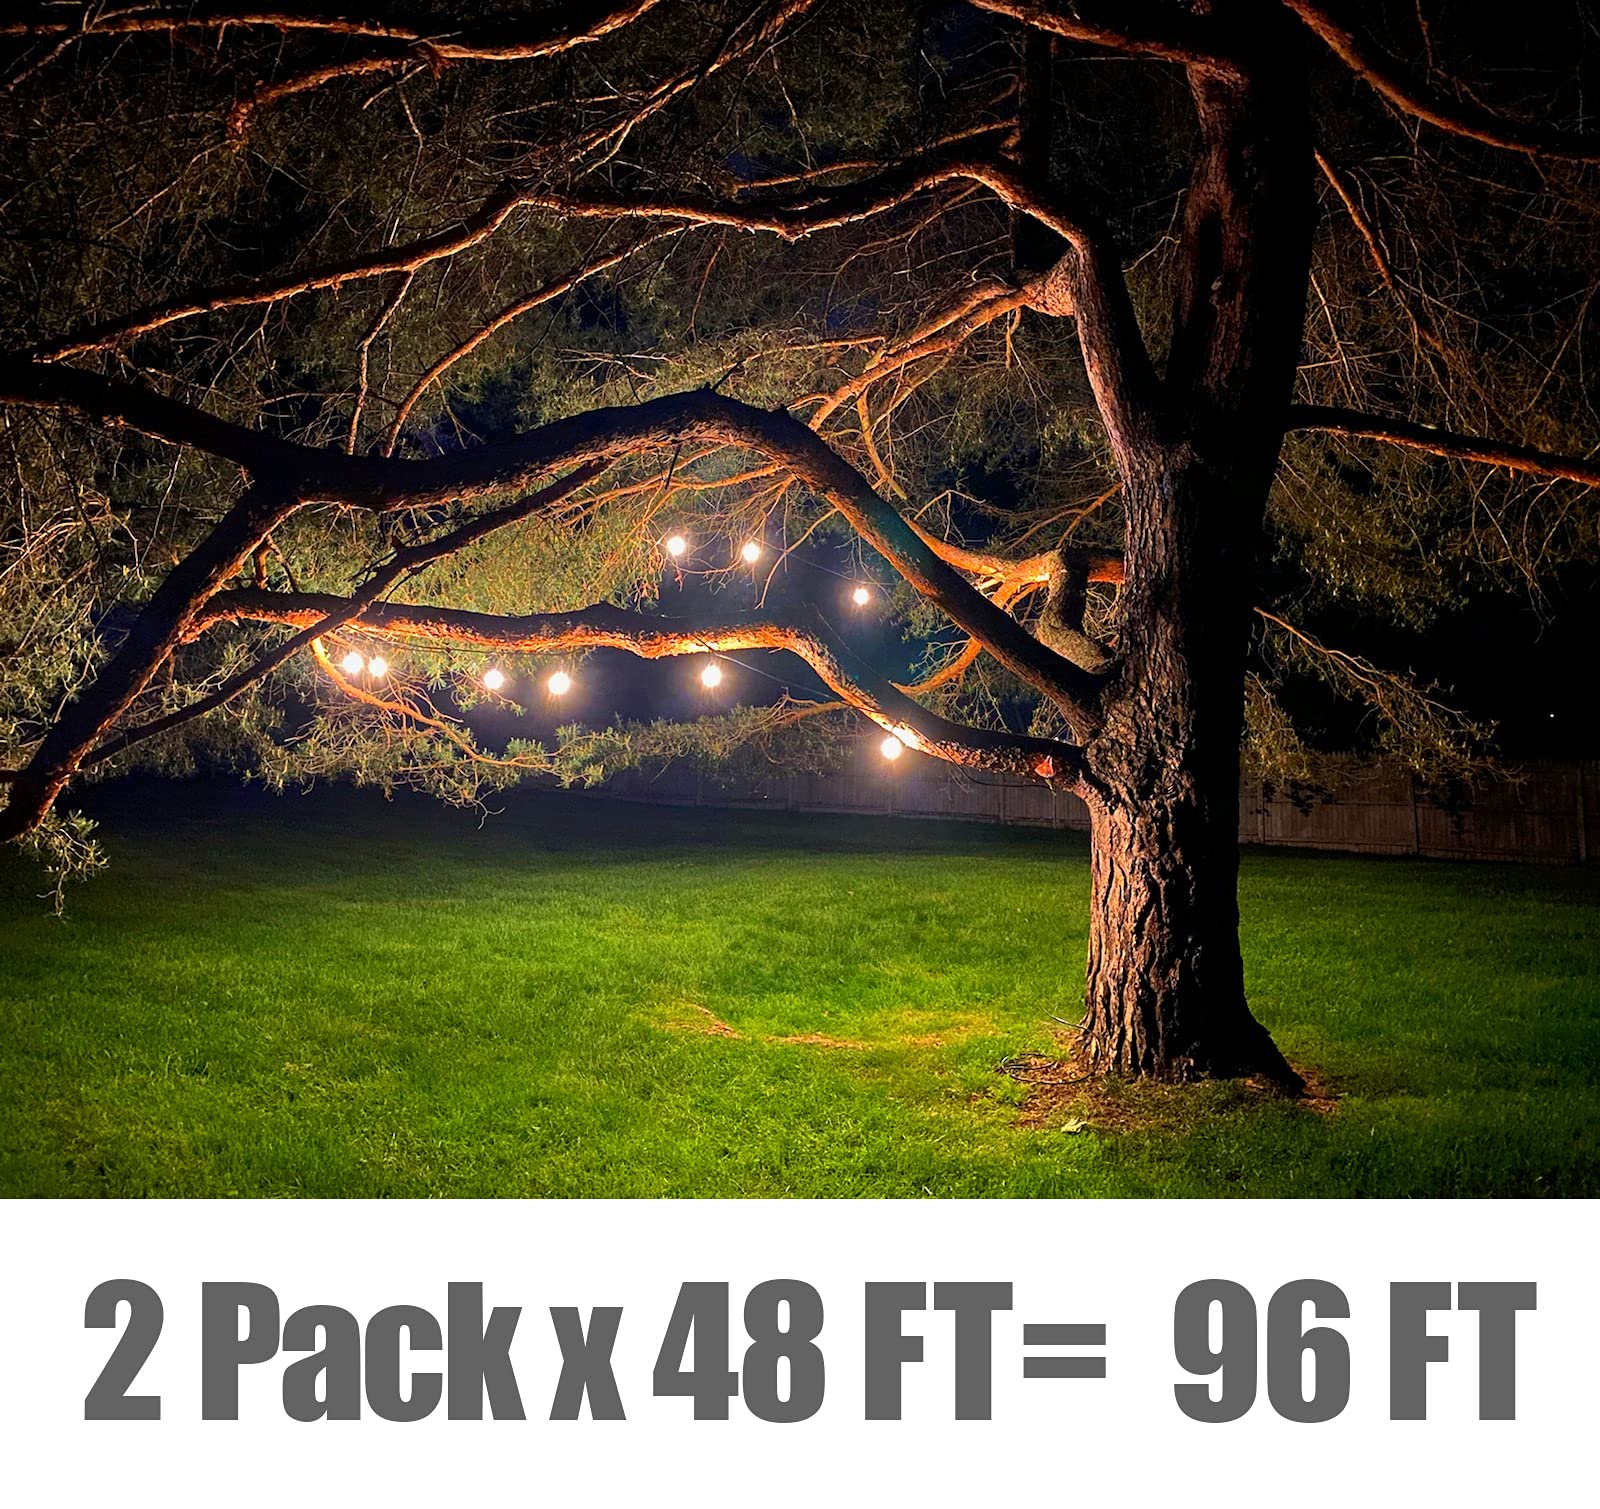 Magictec LED Shatterproof String Lights Commercial Grade with 15 Hanging Sockets 48 Ft Black Outdoor Weatherproof Cord Strand for Patio Garden Porch Backyard Bistro Gazebo Party Deck Yard, 2 Pack